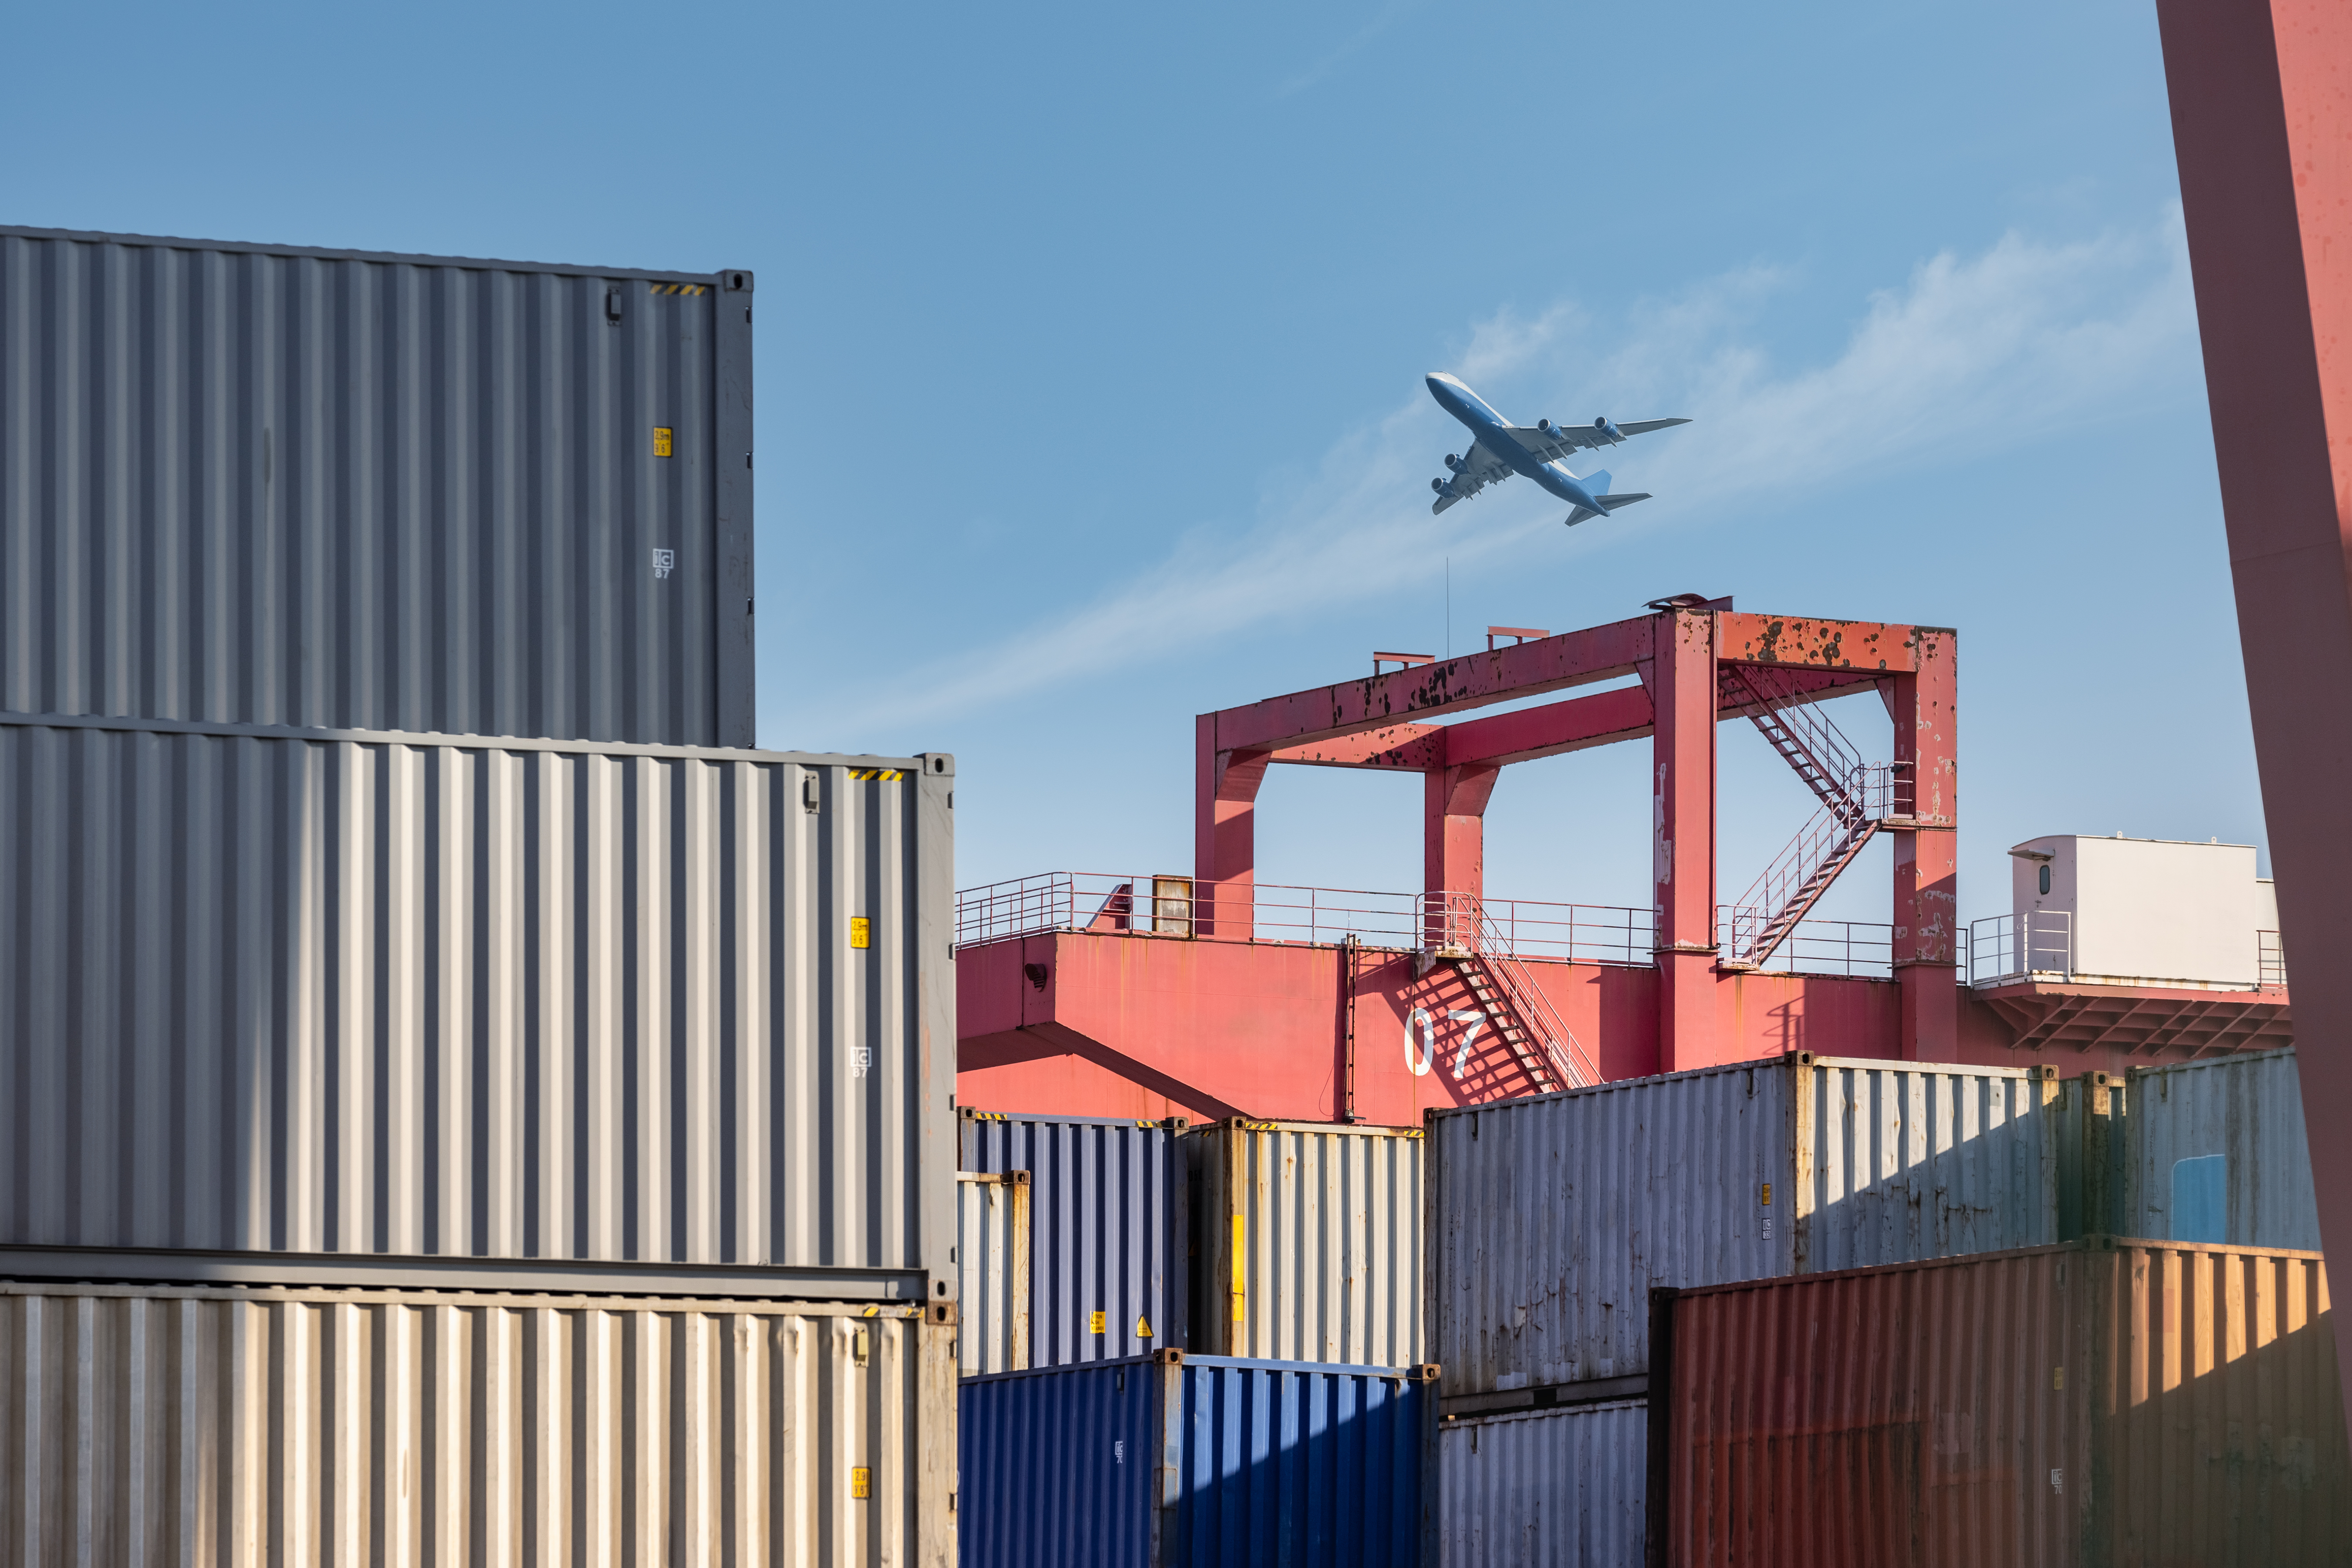 container-yard-closeup-with-airplane-in-sky-2023-11-27-04-50-06-utc